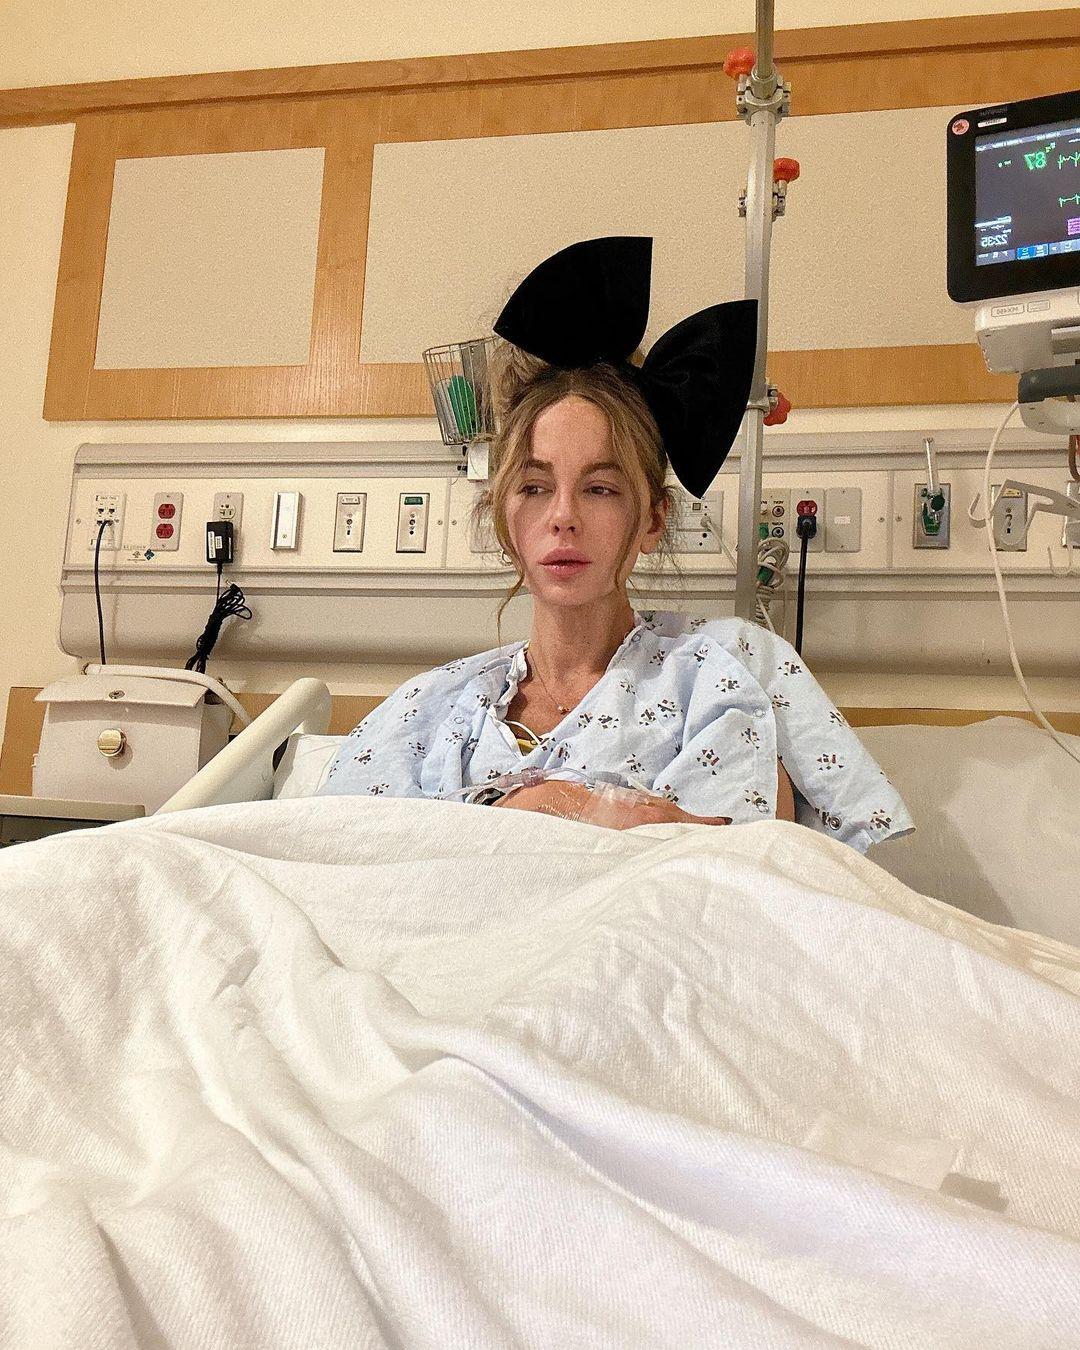 Kate Beckinsale Reveals She's Been Hospitalized With Tearful Photos Of Herself In A Hospital